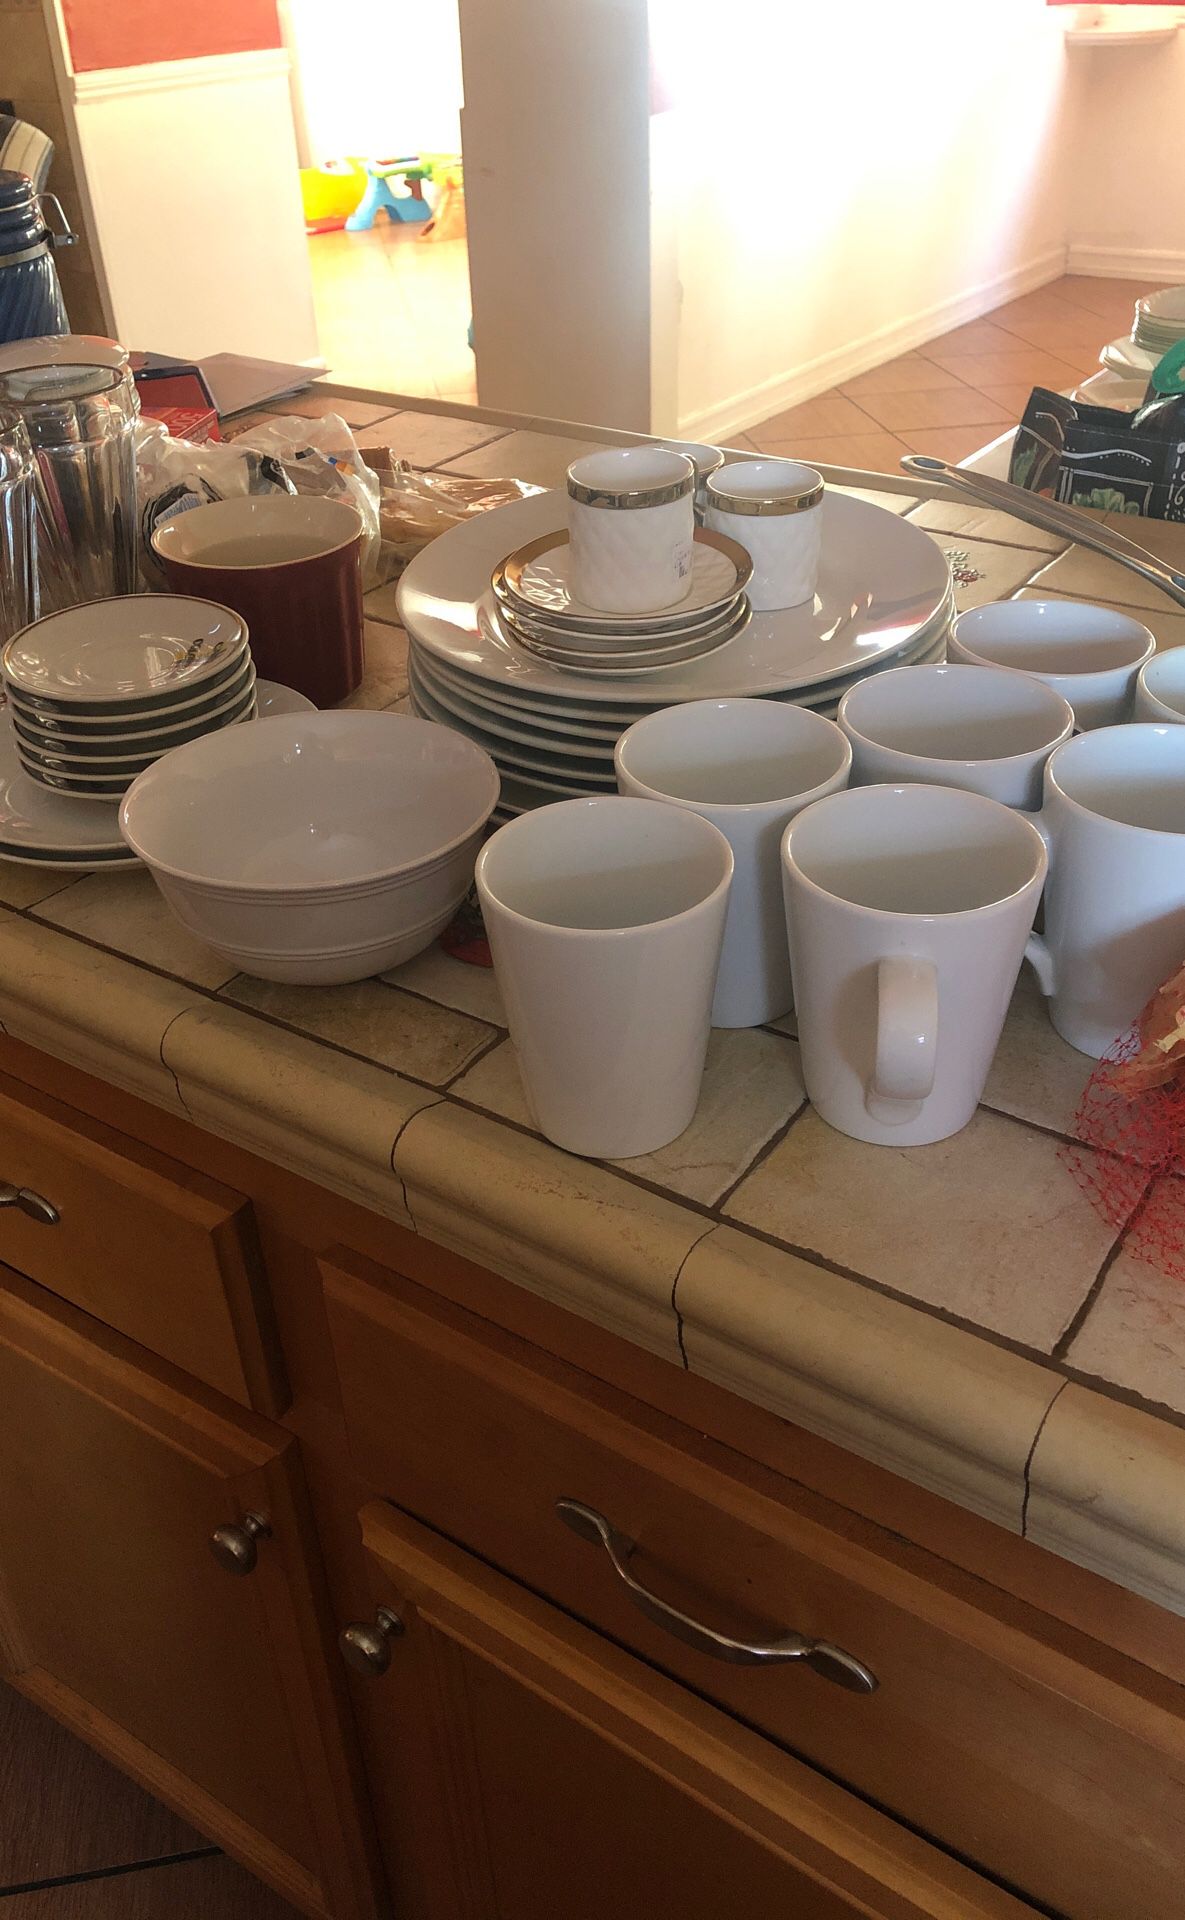 Plates,cups,wine glasses